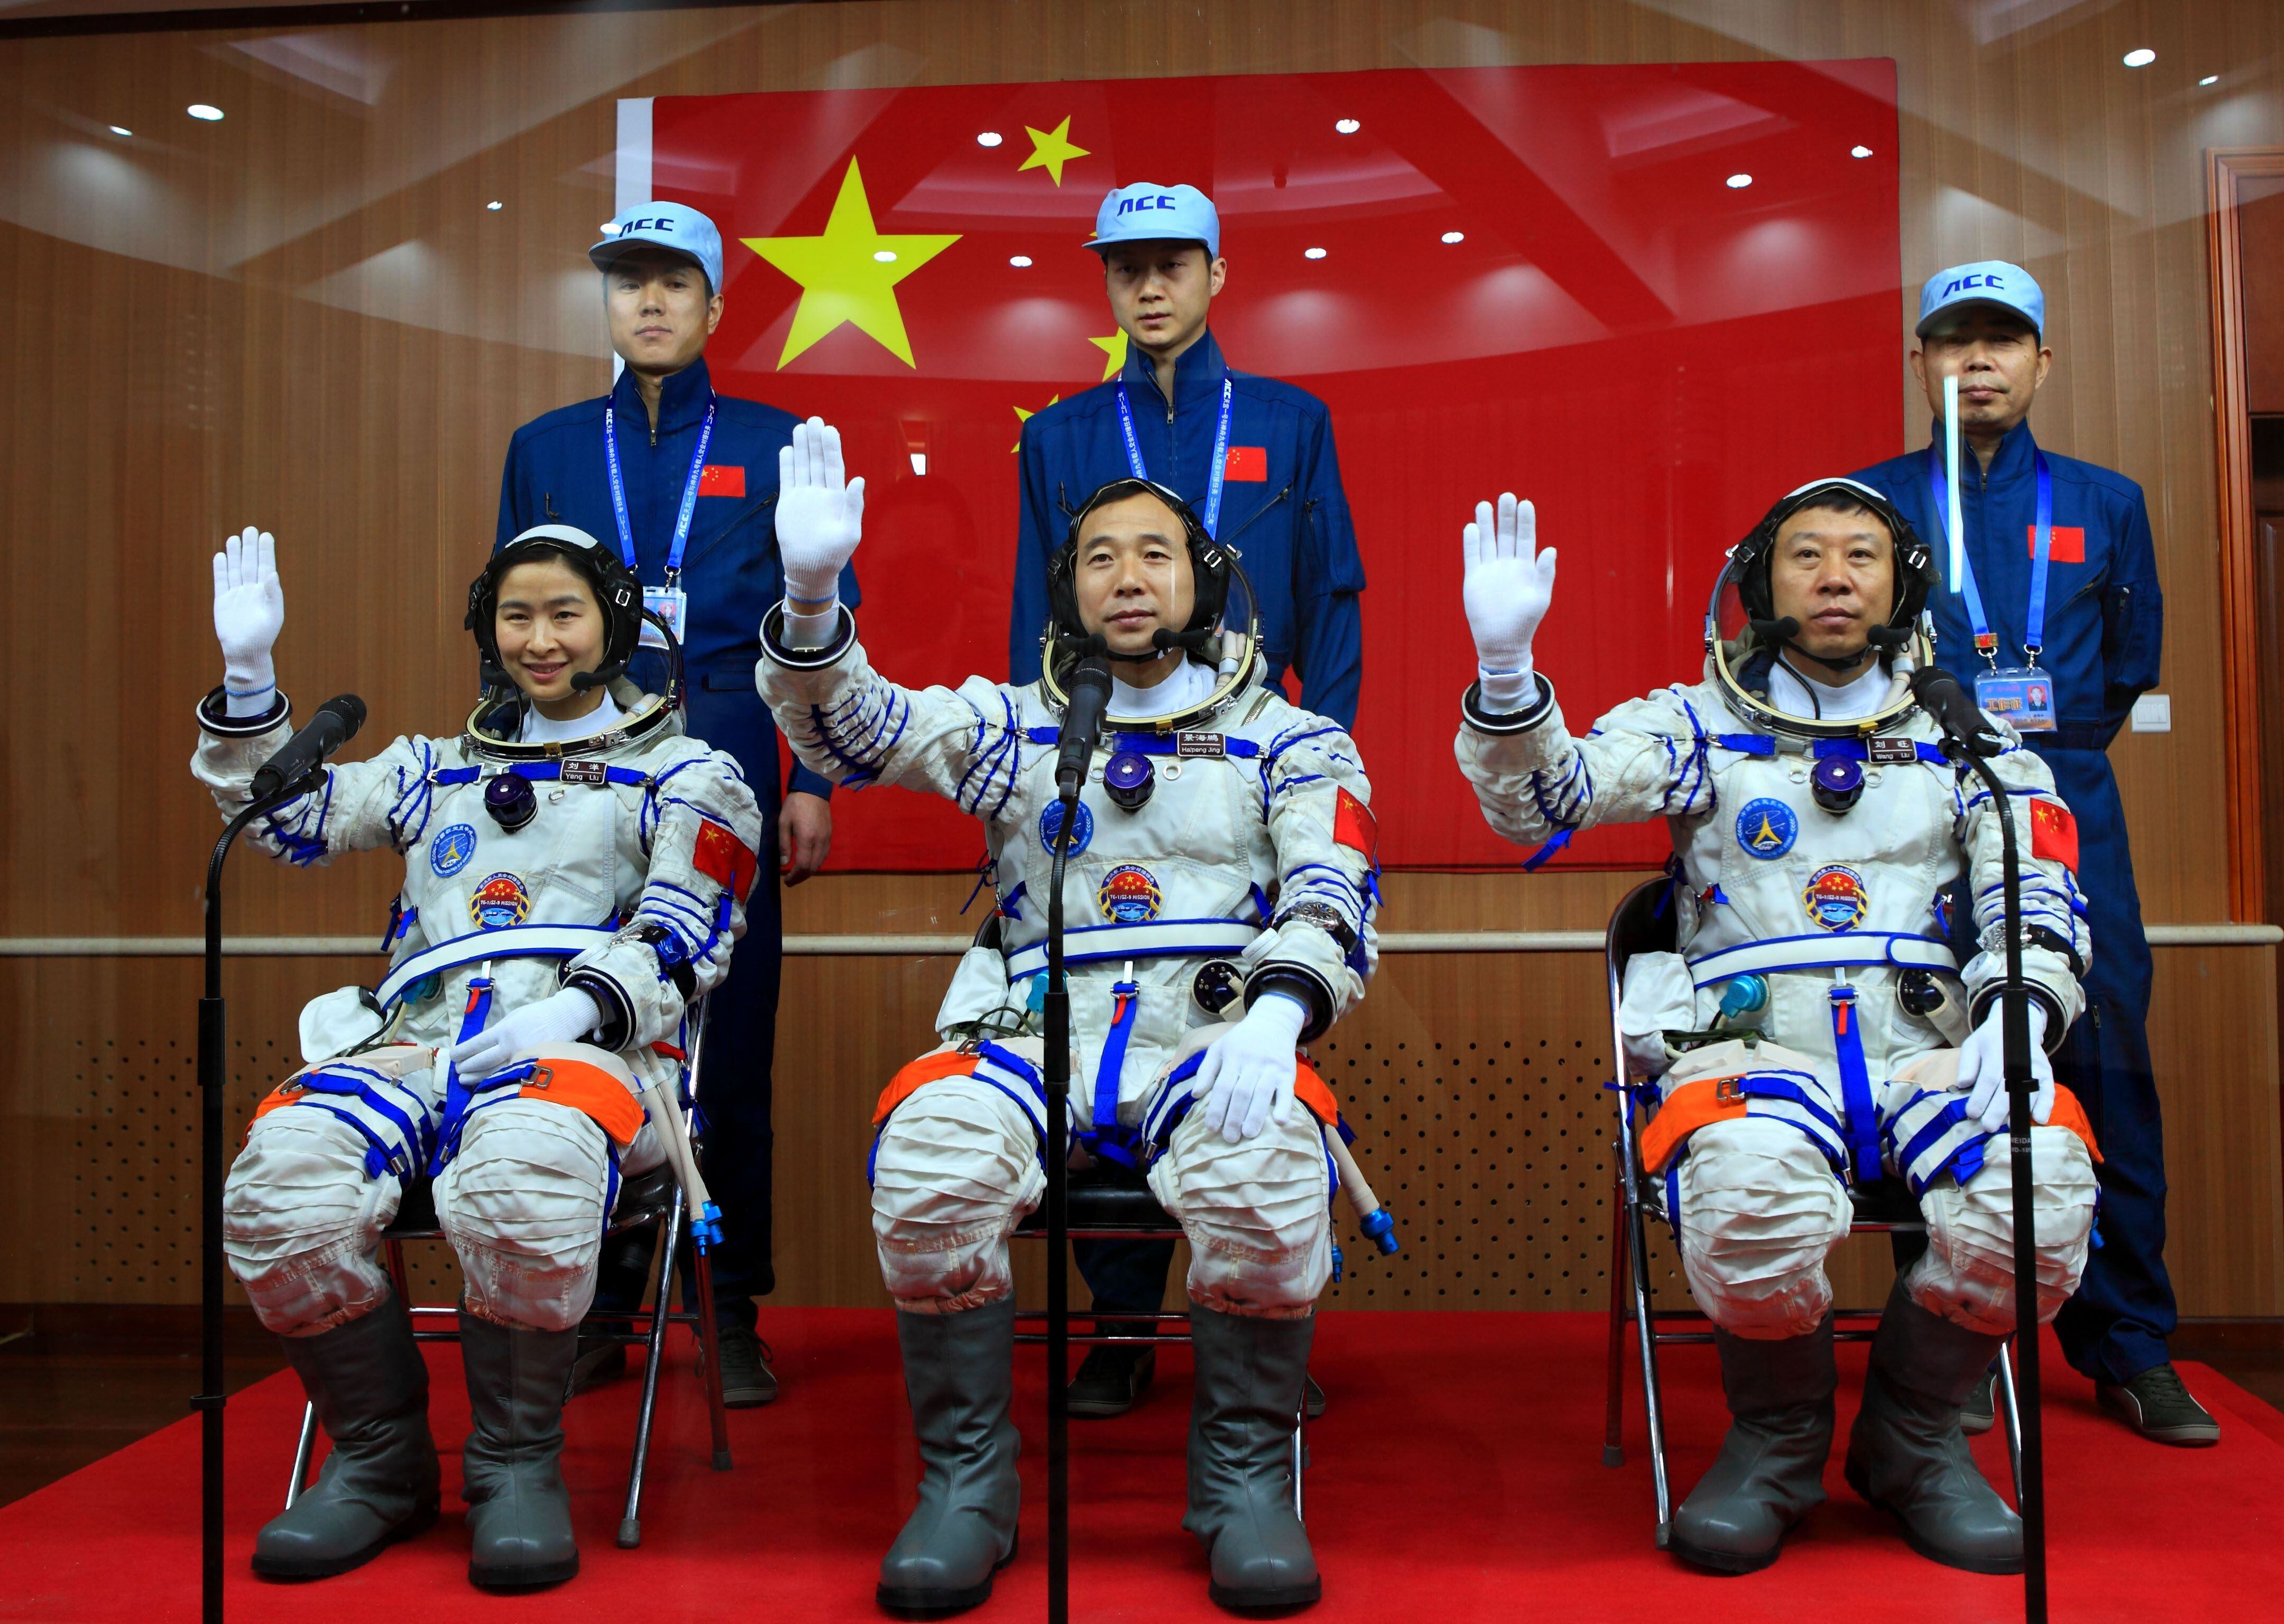 In this 2012 photo, three Chinese astronauts, including Liu Yang, the country's first female astronaut, pose for an official photo.  AFP